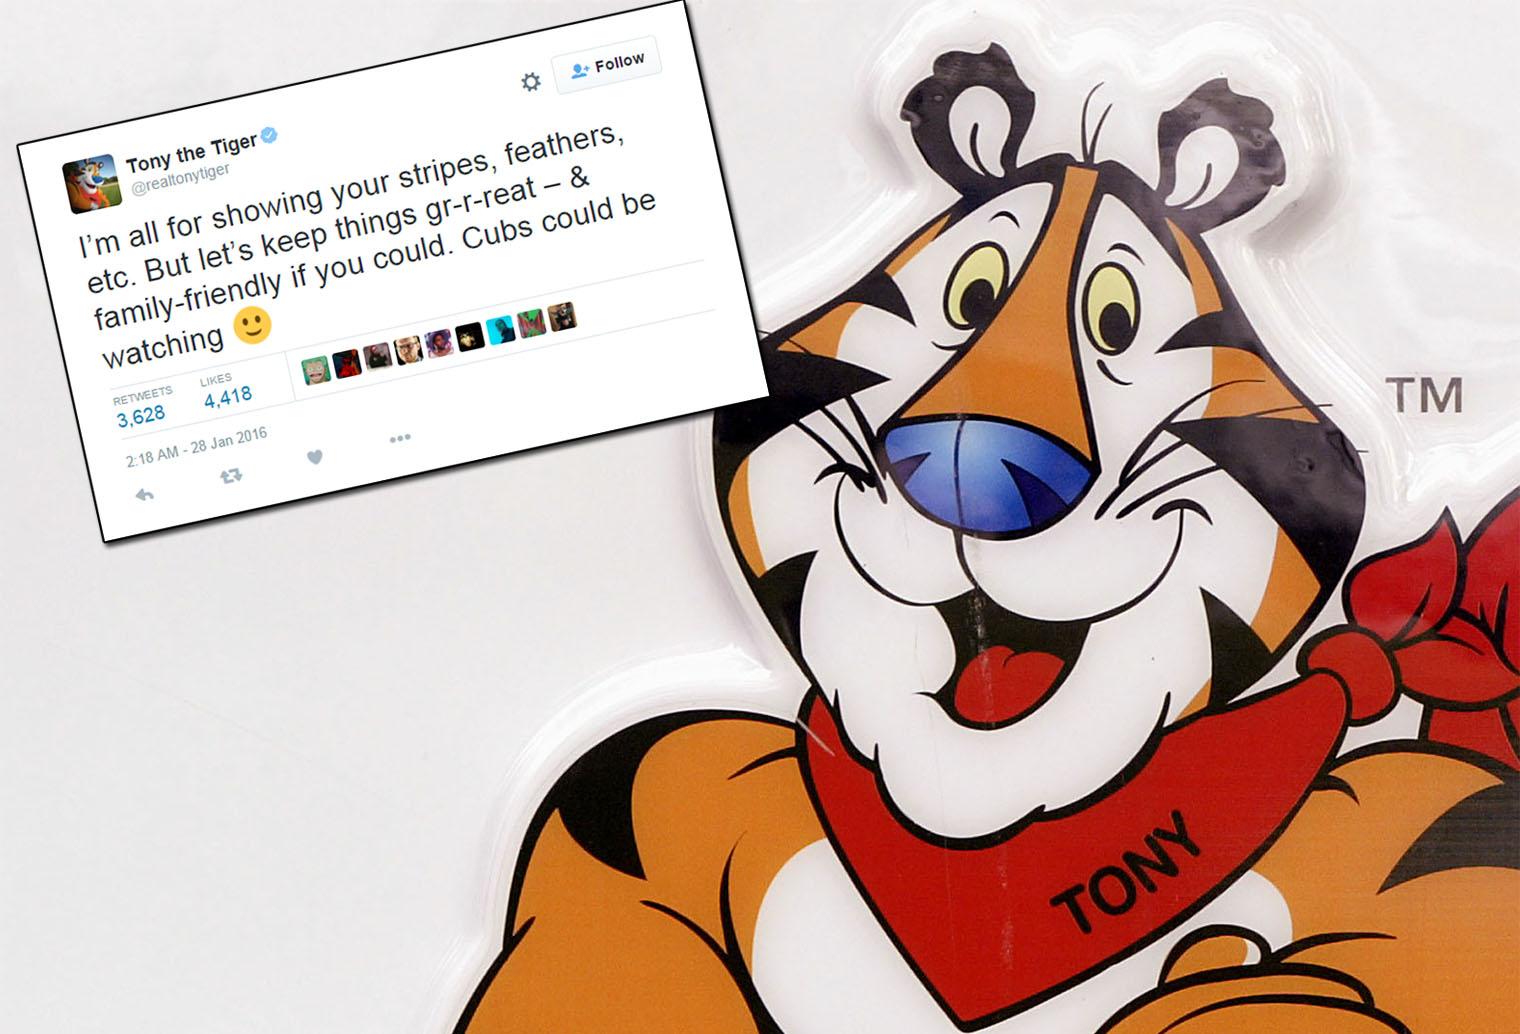 Furry Tiger - Fictional Kellogg's mascot Tony the Tiger has been forced to ...